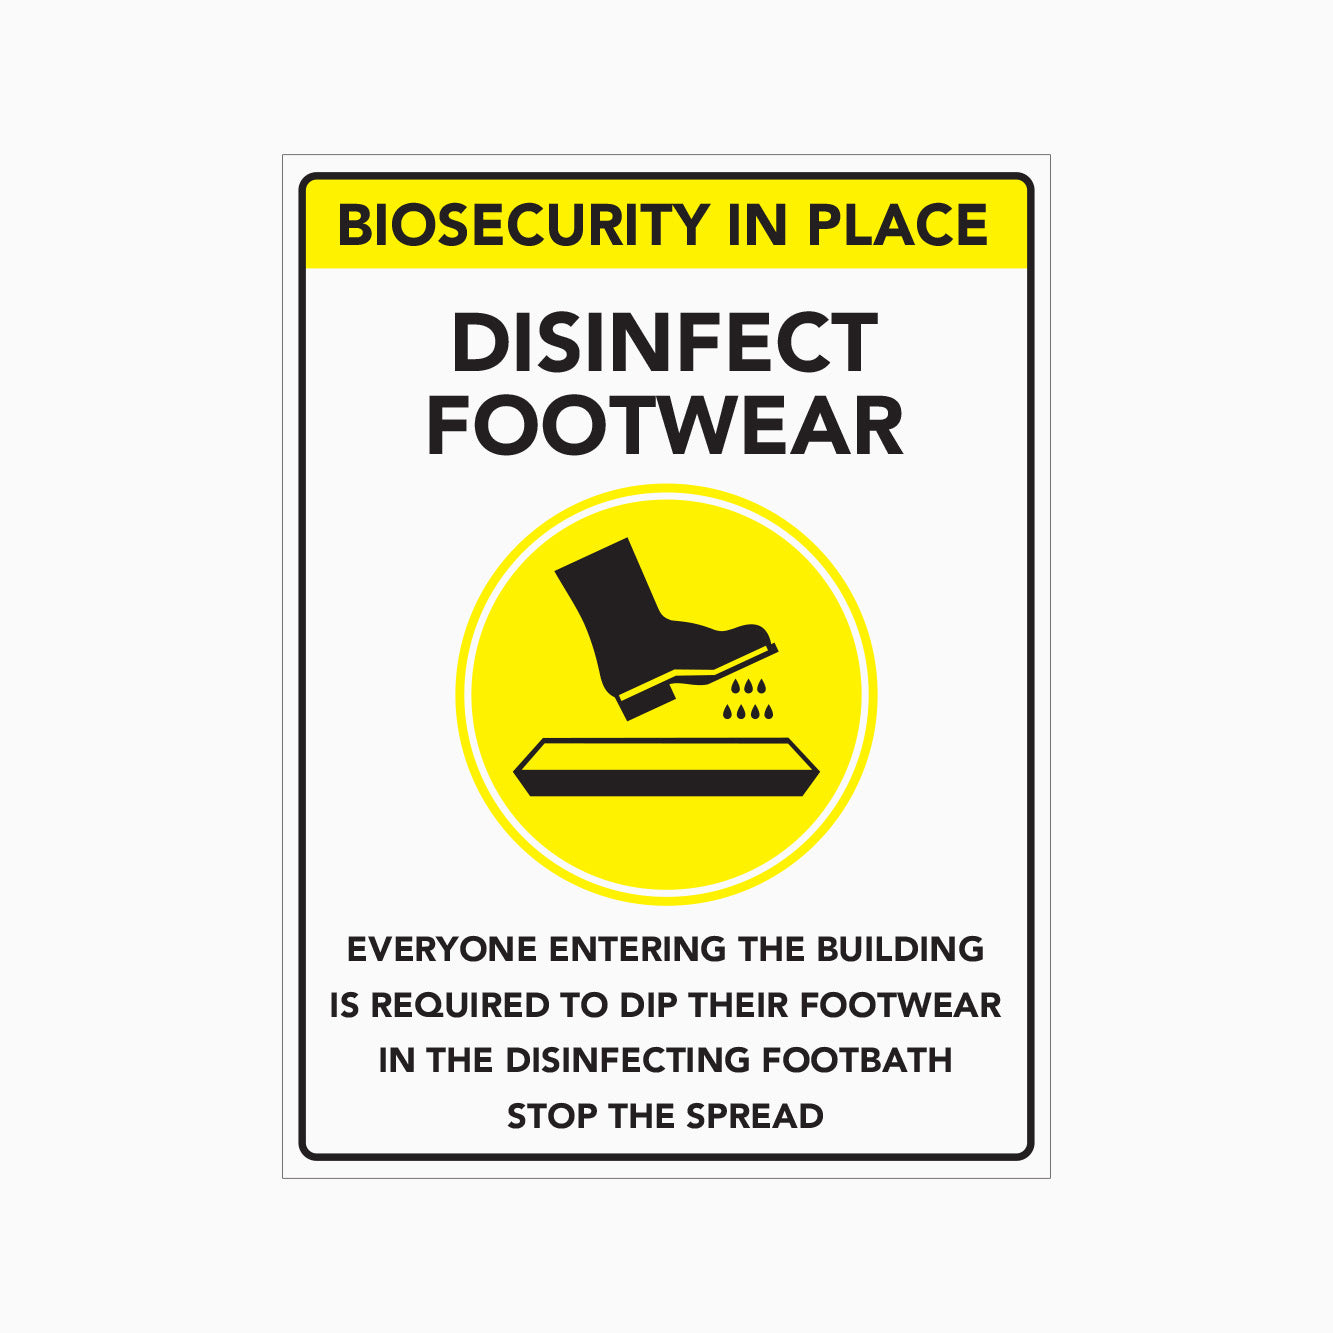 BIOSECURITY IN PLACE DISINFECT FOOTWEAR SIGN  - EVERYONE ENTERING THE BUILDING IS REQUIRED TO DIP THEIR FOOTWEAR IN THE DISINFECTING FOOTBATH STOP THE SPREAD SIGN